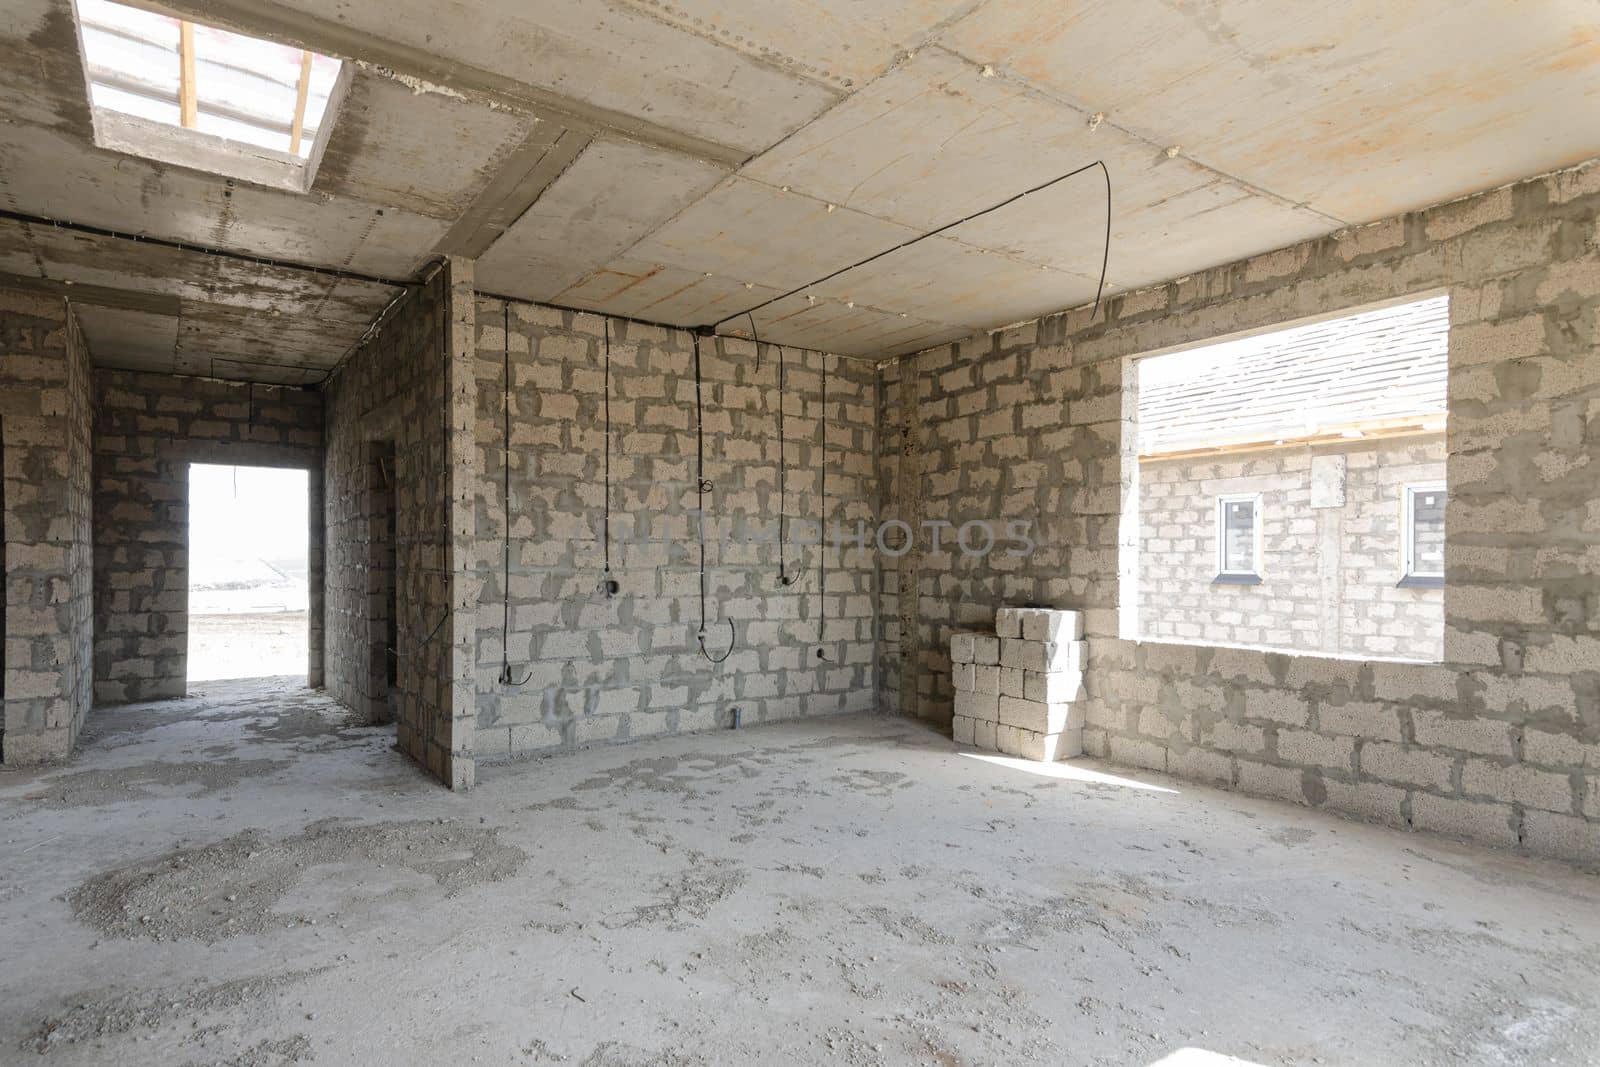 Construction of an individual residential building, view of a spacious room with a large window opening and a corridor leading to the front door by Madhourse